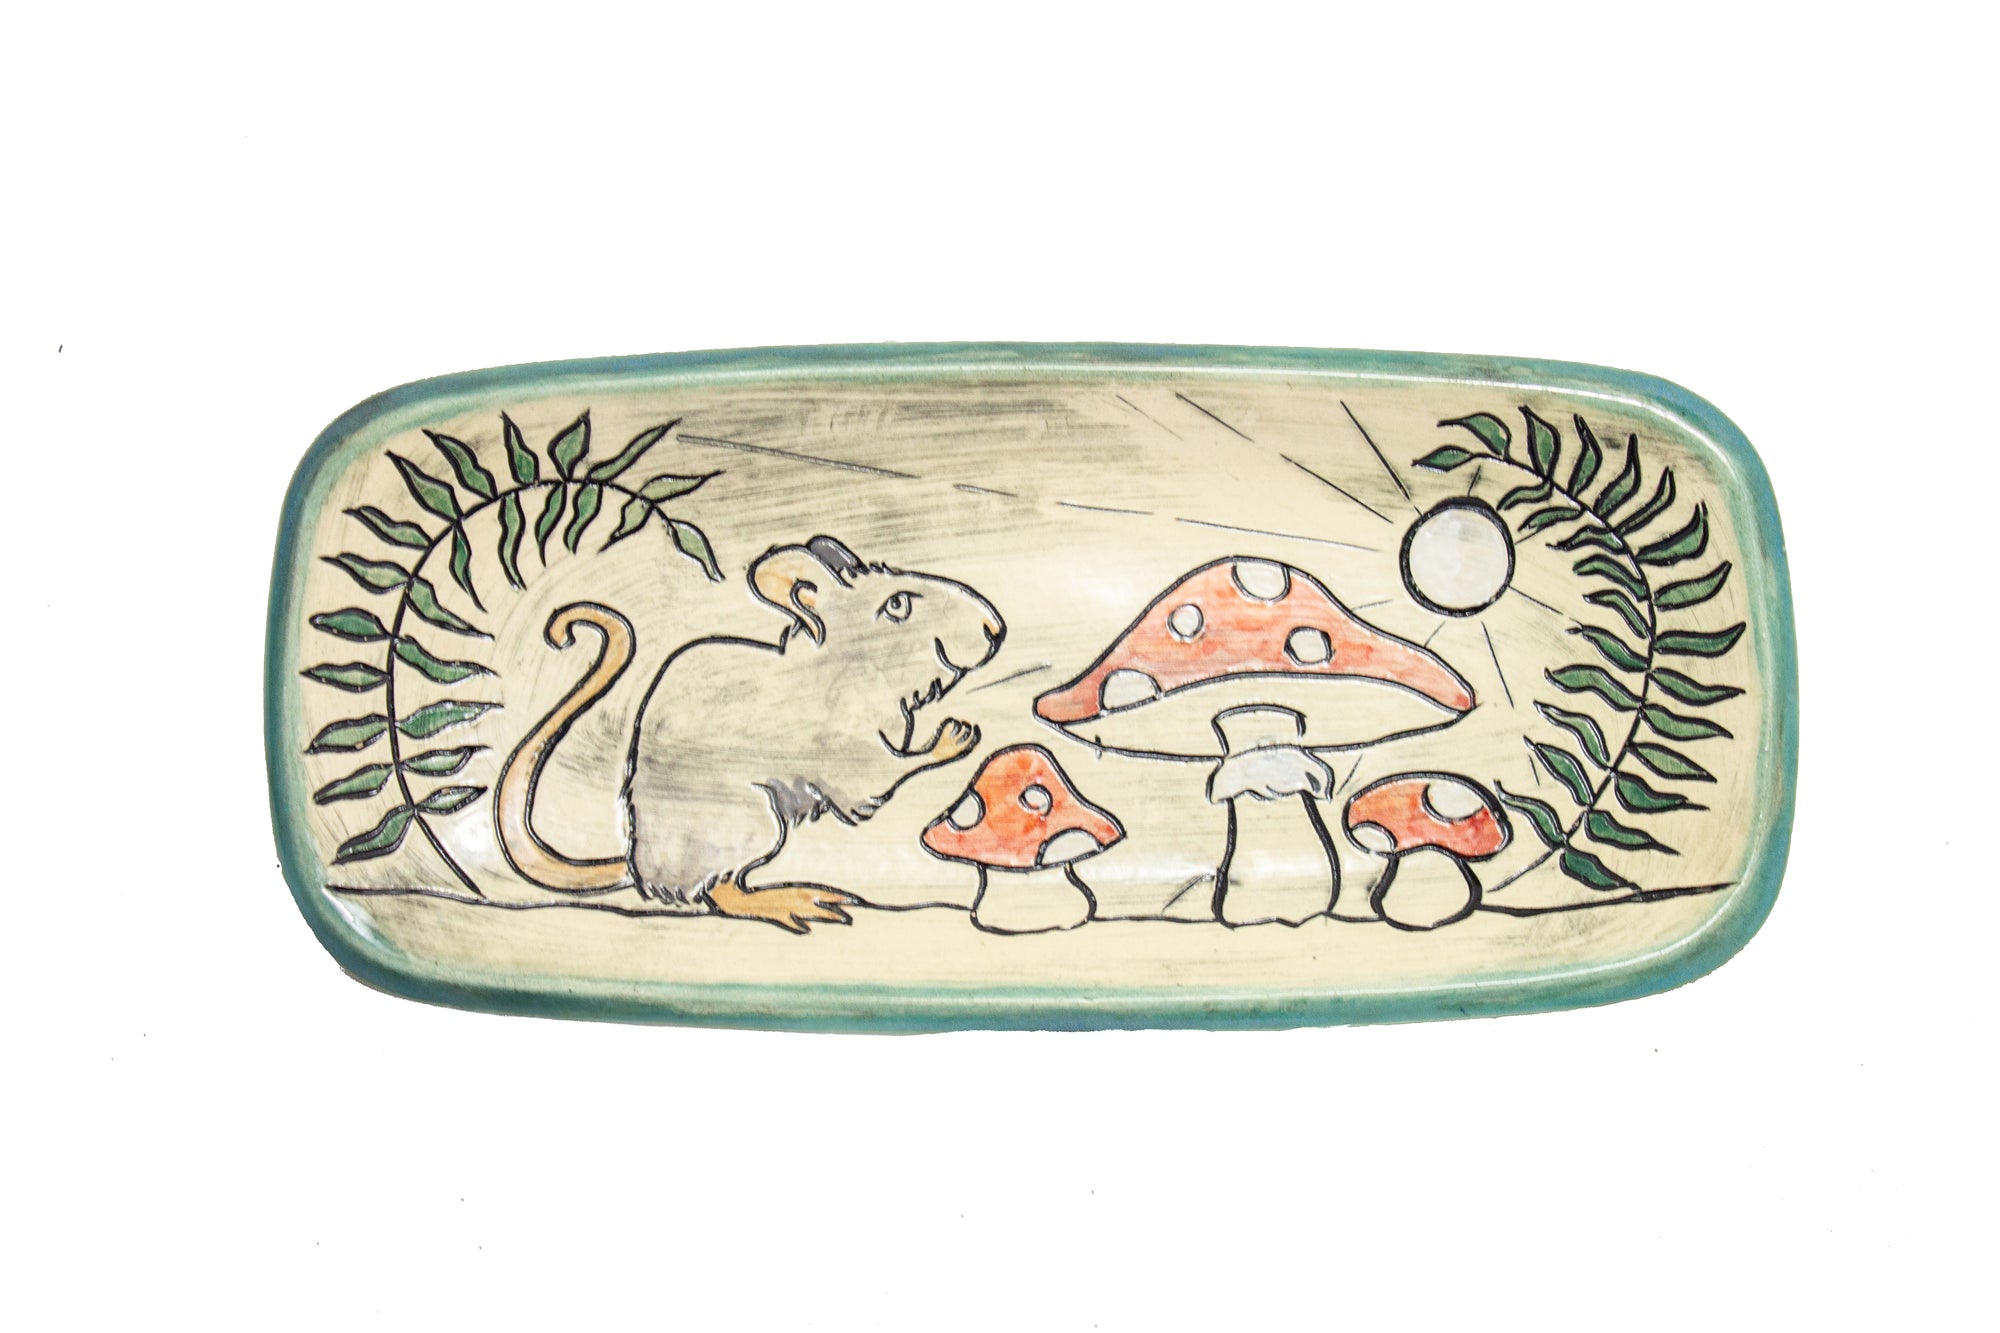 Mouse and Mushrooms (Small Tray)